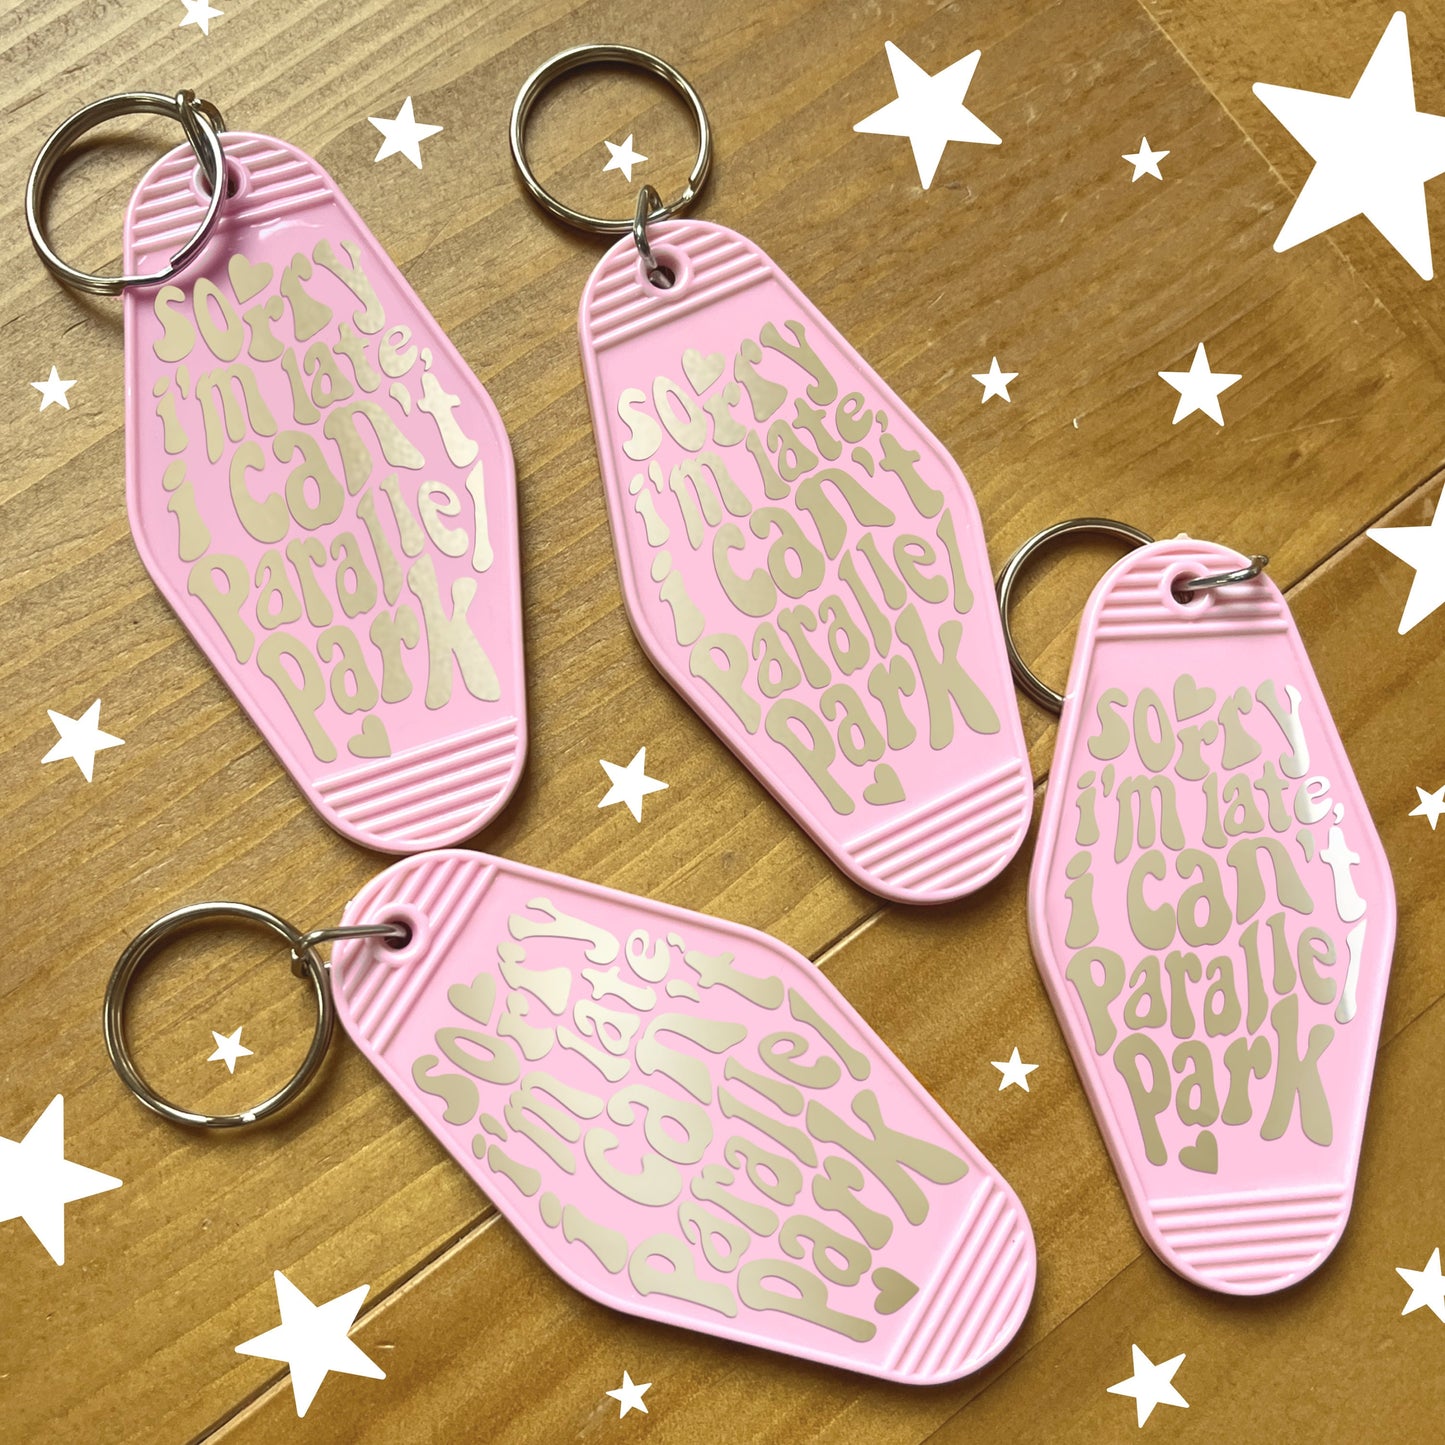 Sorry I'm Late I Can't Parallel Park Keychain | Pink Motel Style Keychains, Passed Driving Test, Driving Test Gift, First Car Gift, Car Gift